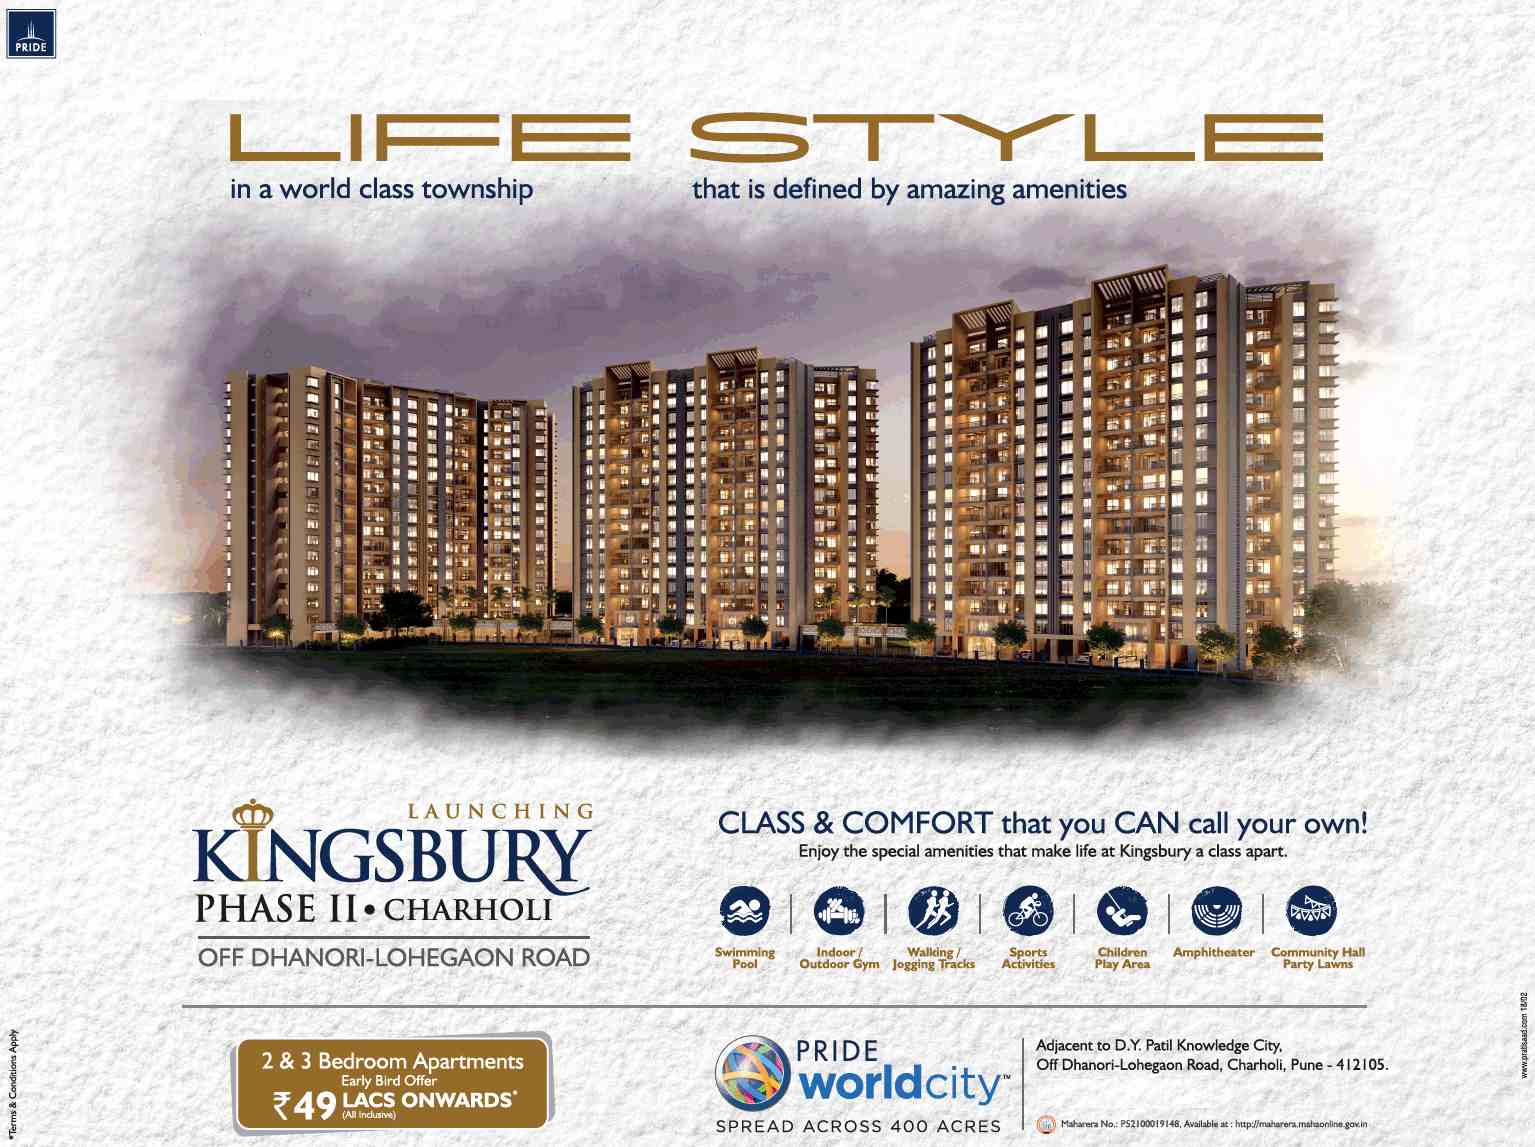 Book 2 & 3 bed apartments @ Rs 49 Lacs onwards at Pride Kingsbury in Charholi, Pune Update